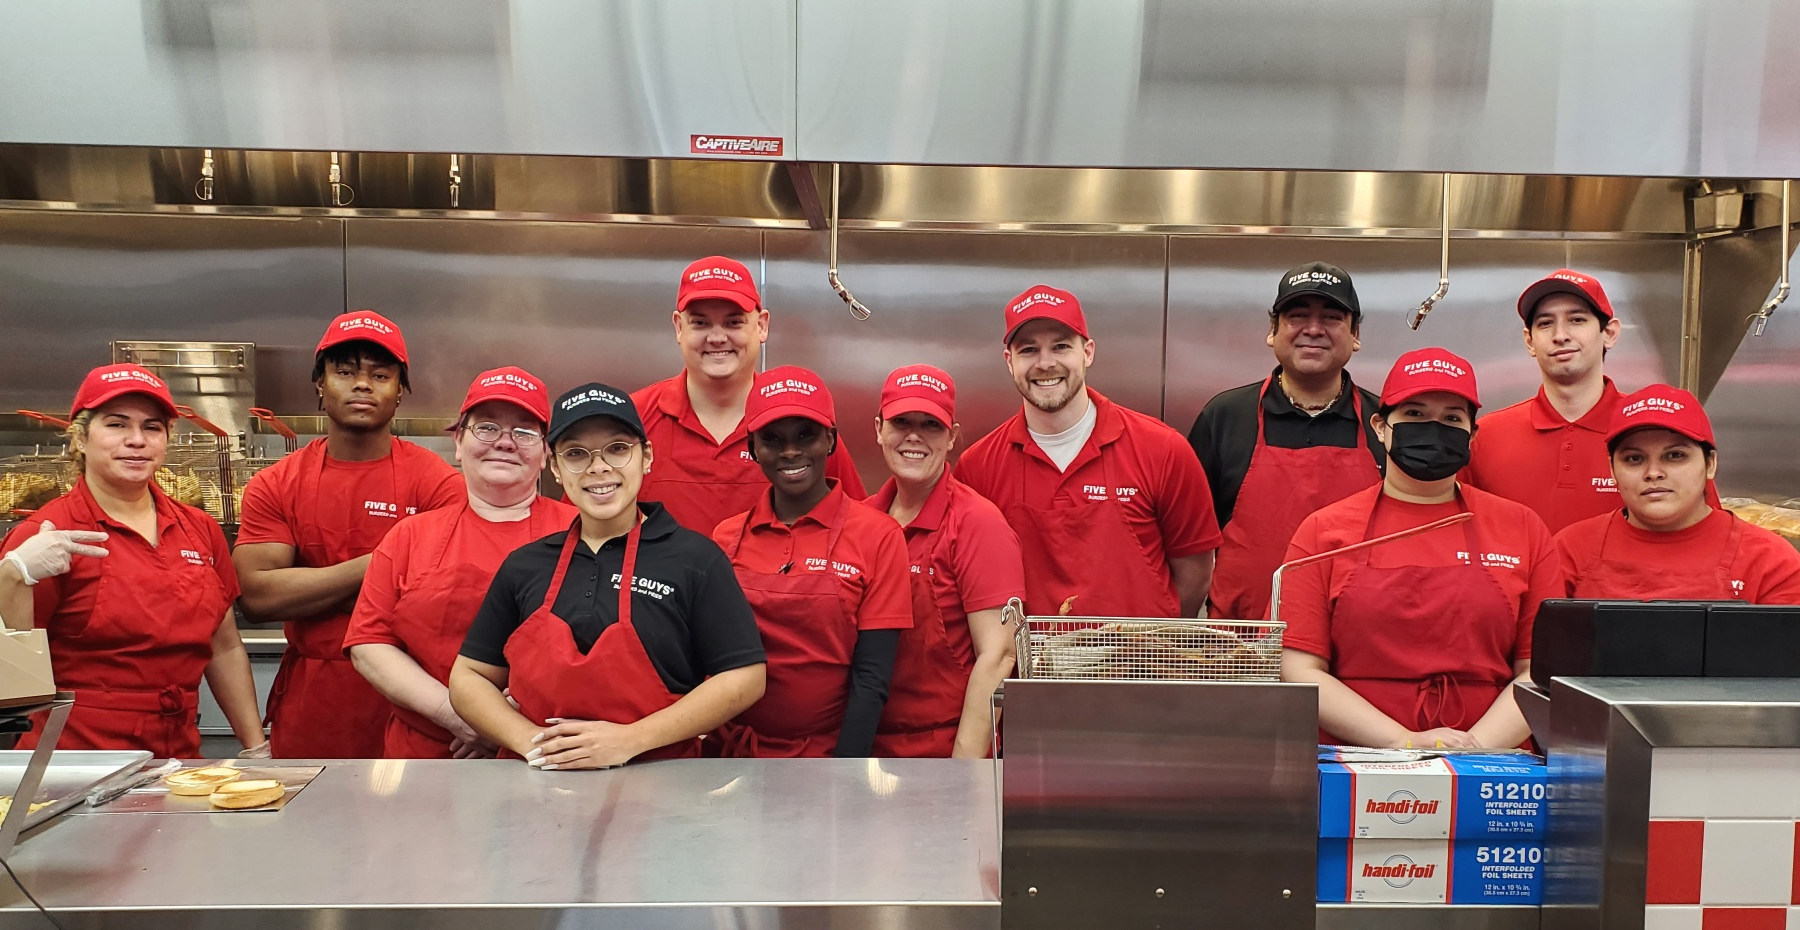 Employee pose for a photograph in the kitchen ahead of the grand opening of the Five Guys restaurant at 44795 Dulles Overlook Drive in Ashburn, Virginia.